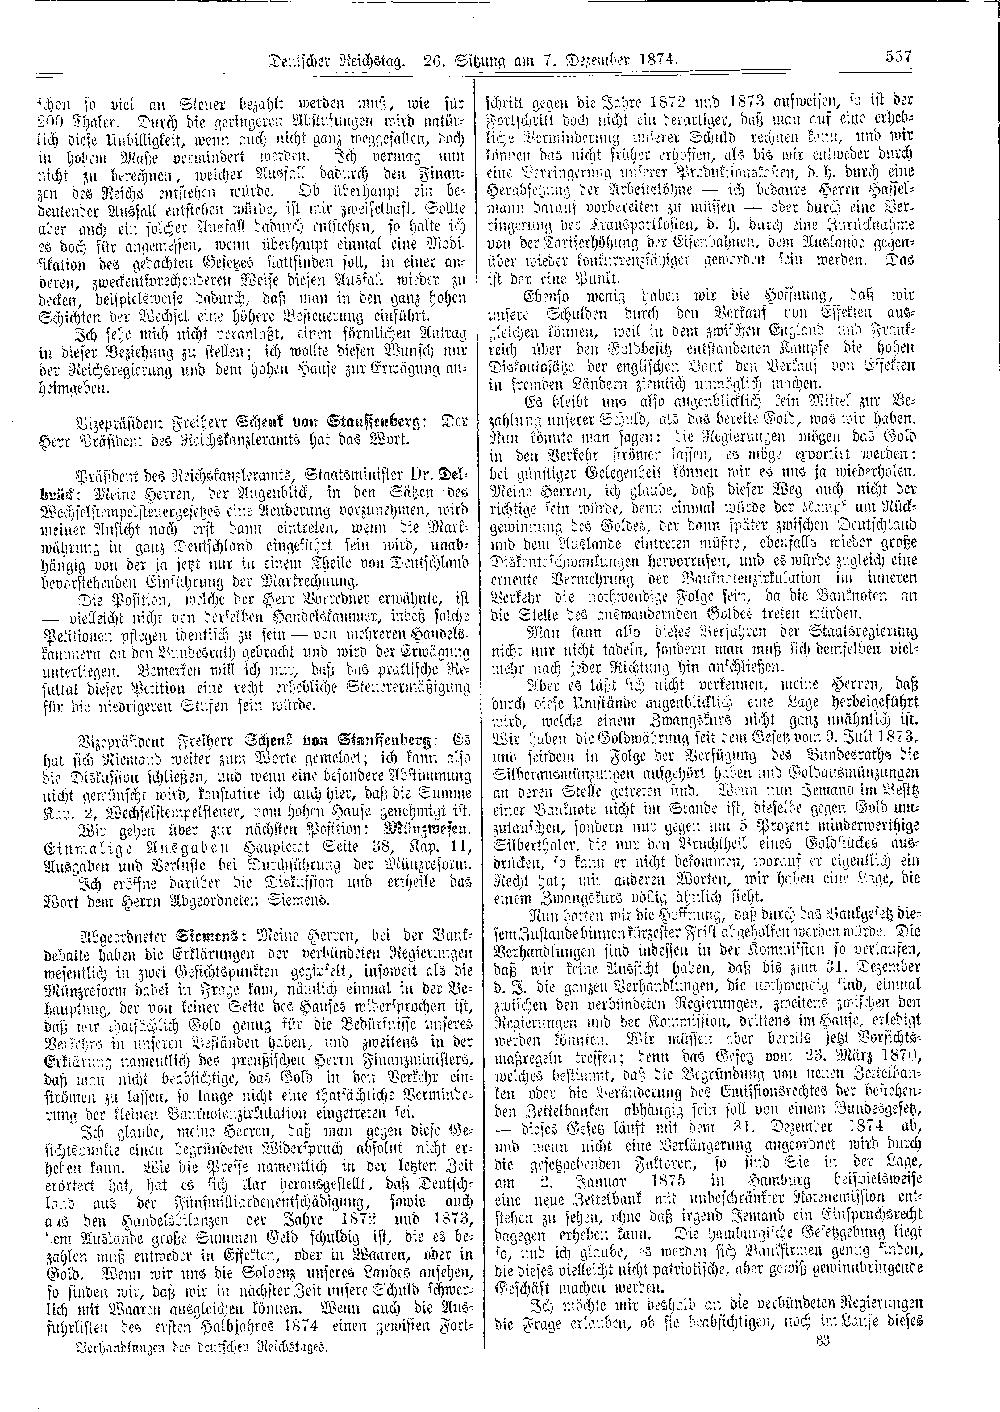 Scan of page 557